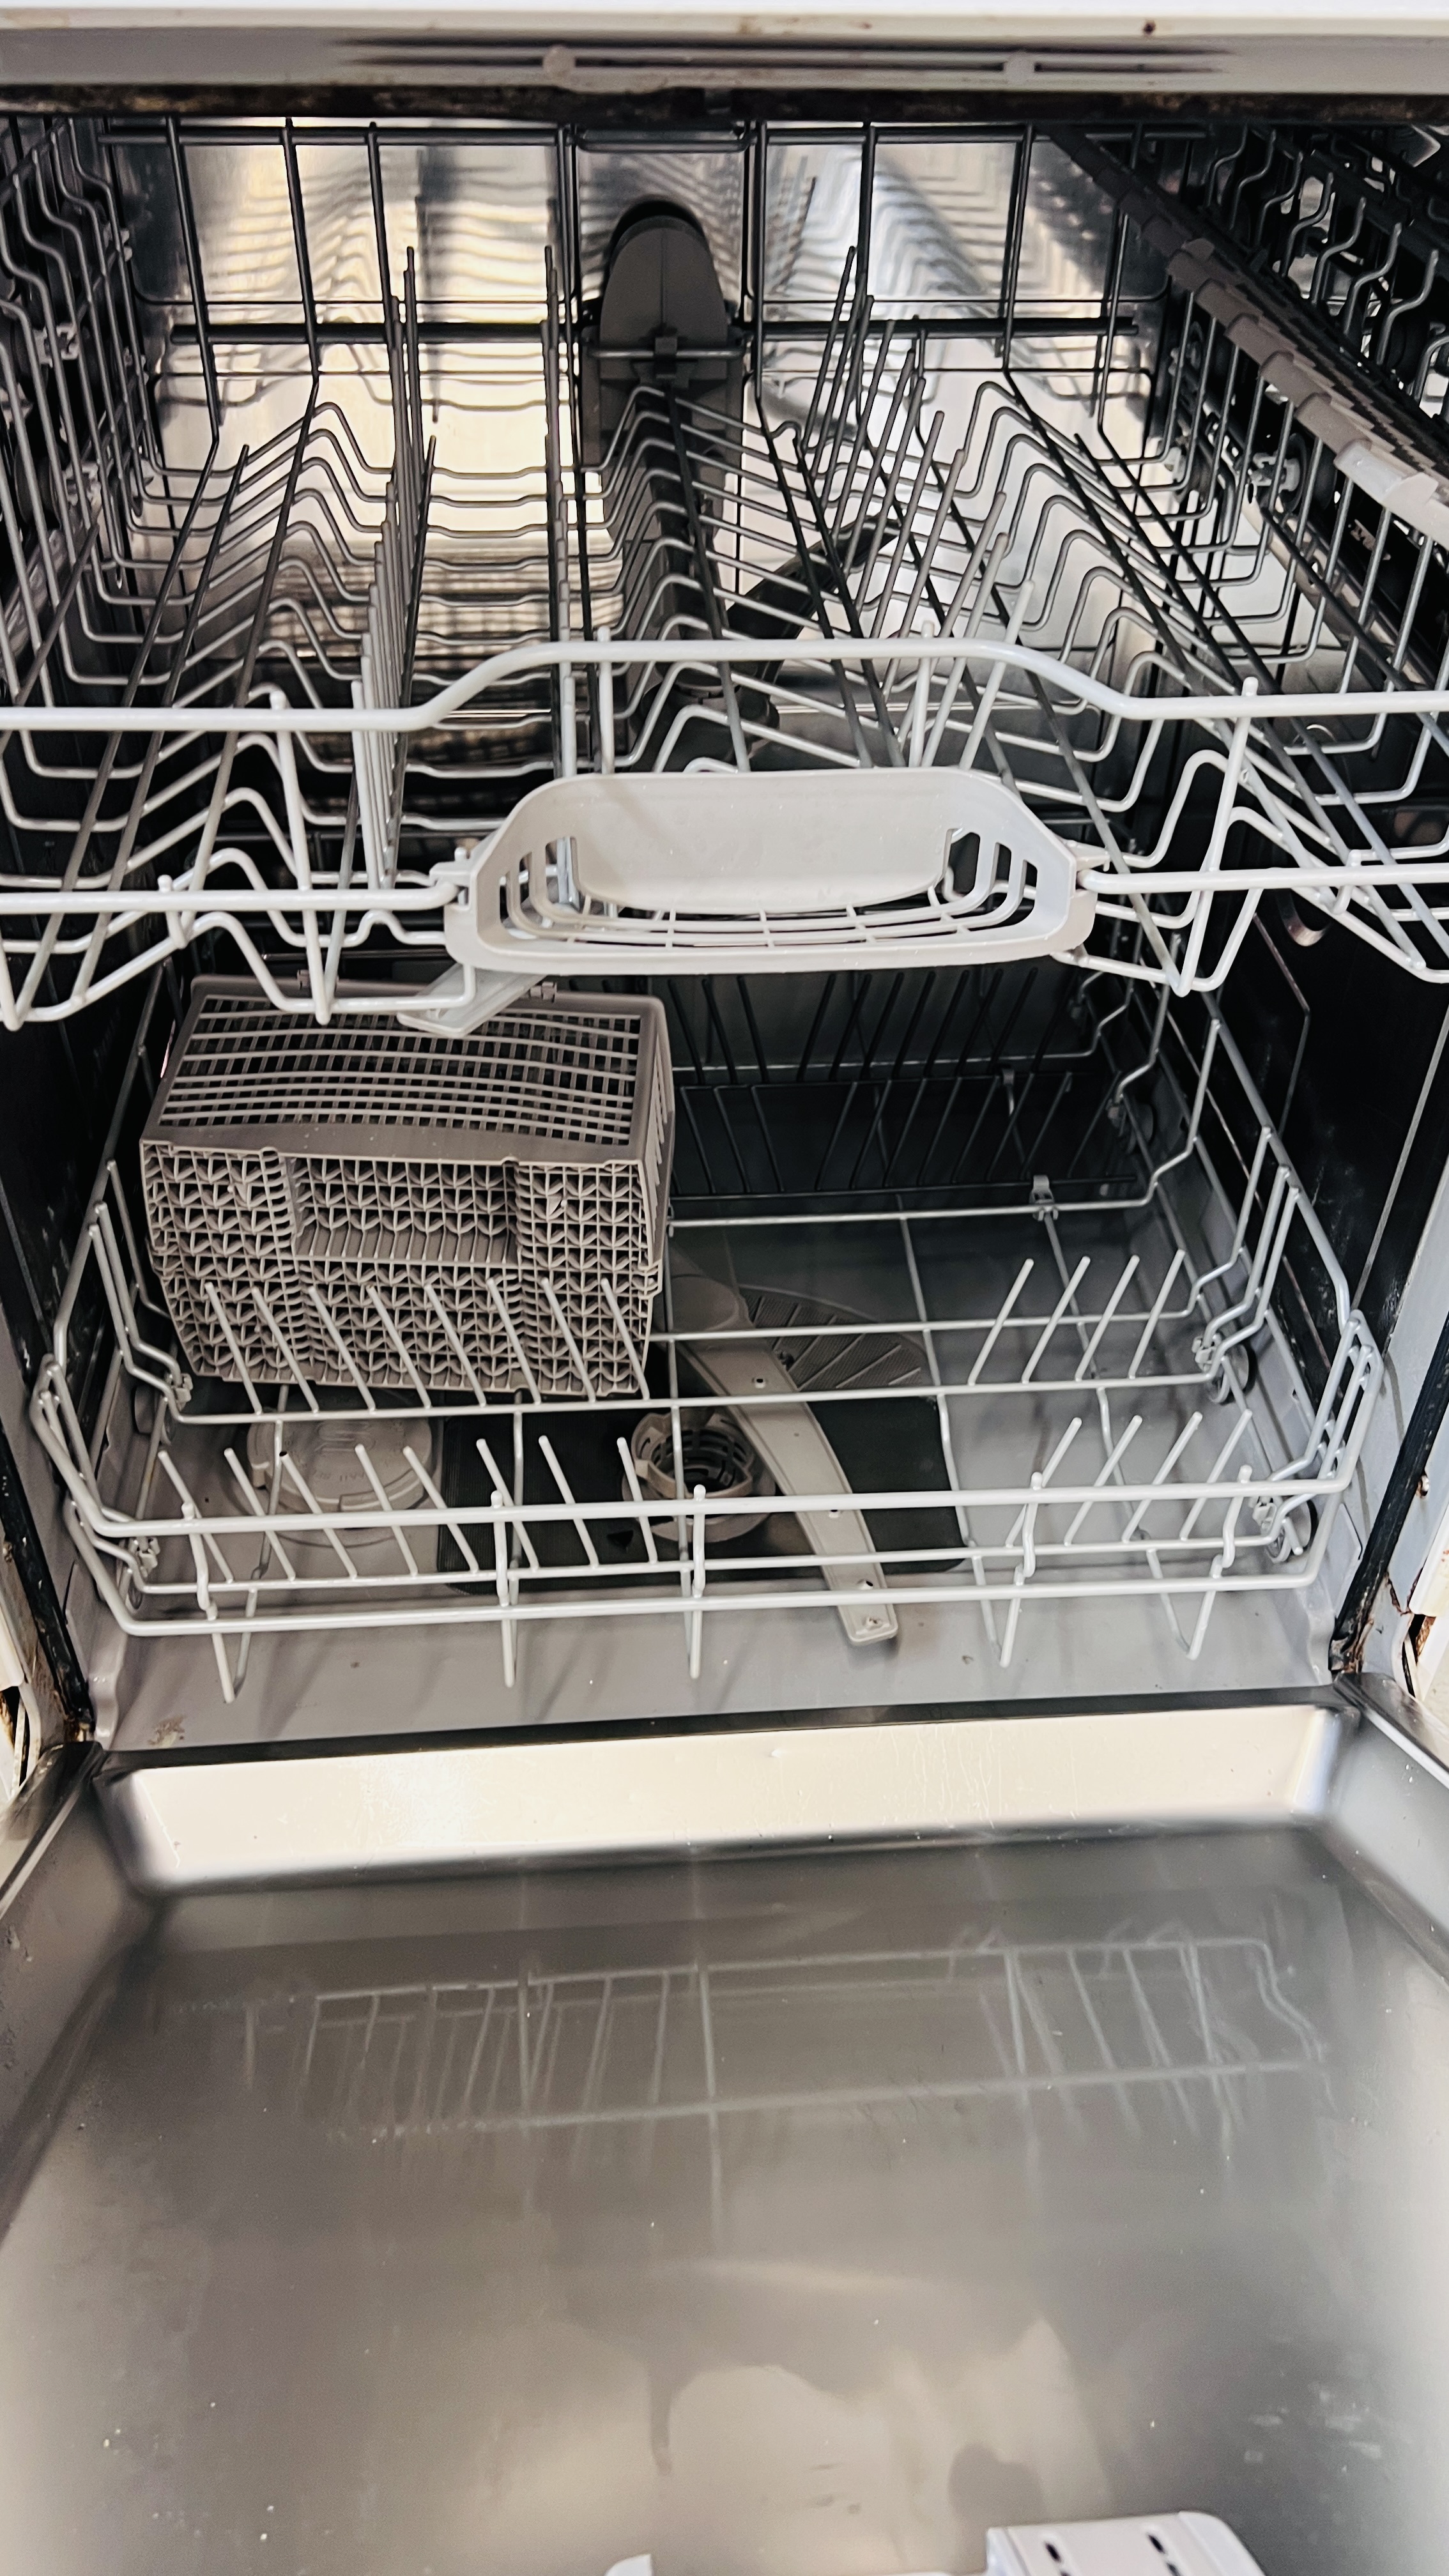 A BOSCH DISHWASHER - SOLD AS SEEN. - Image 9 of 9